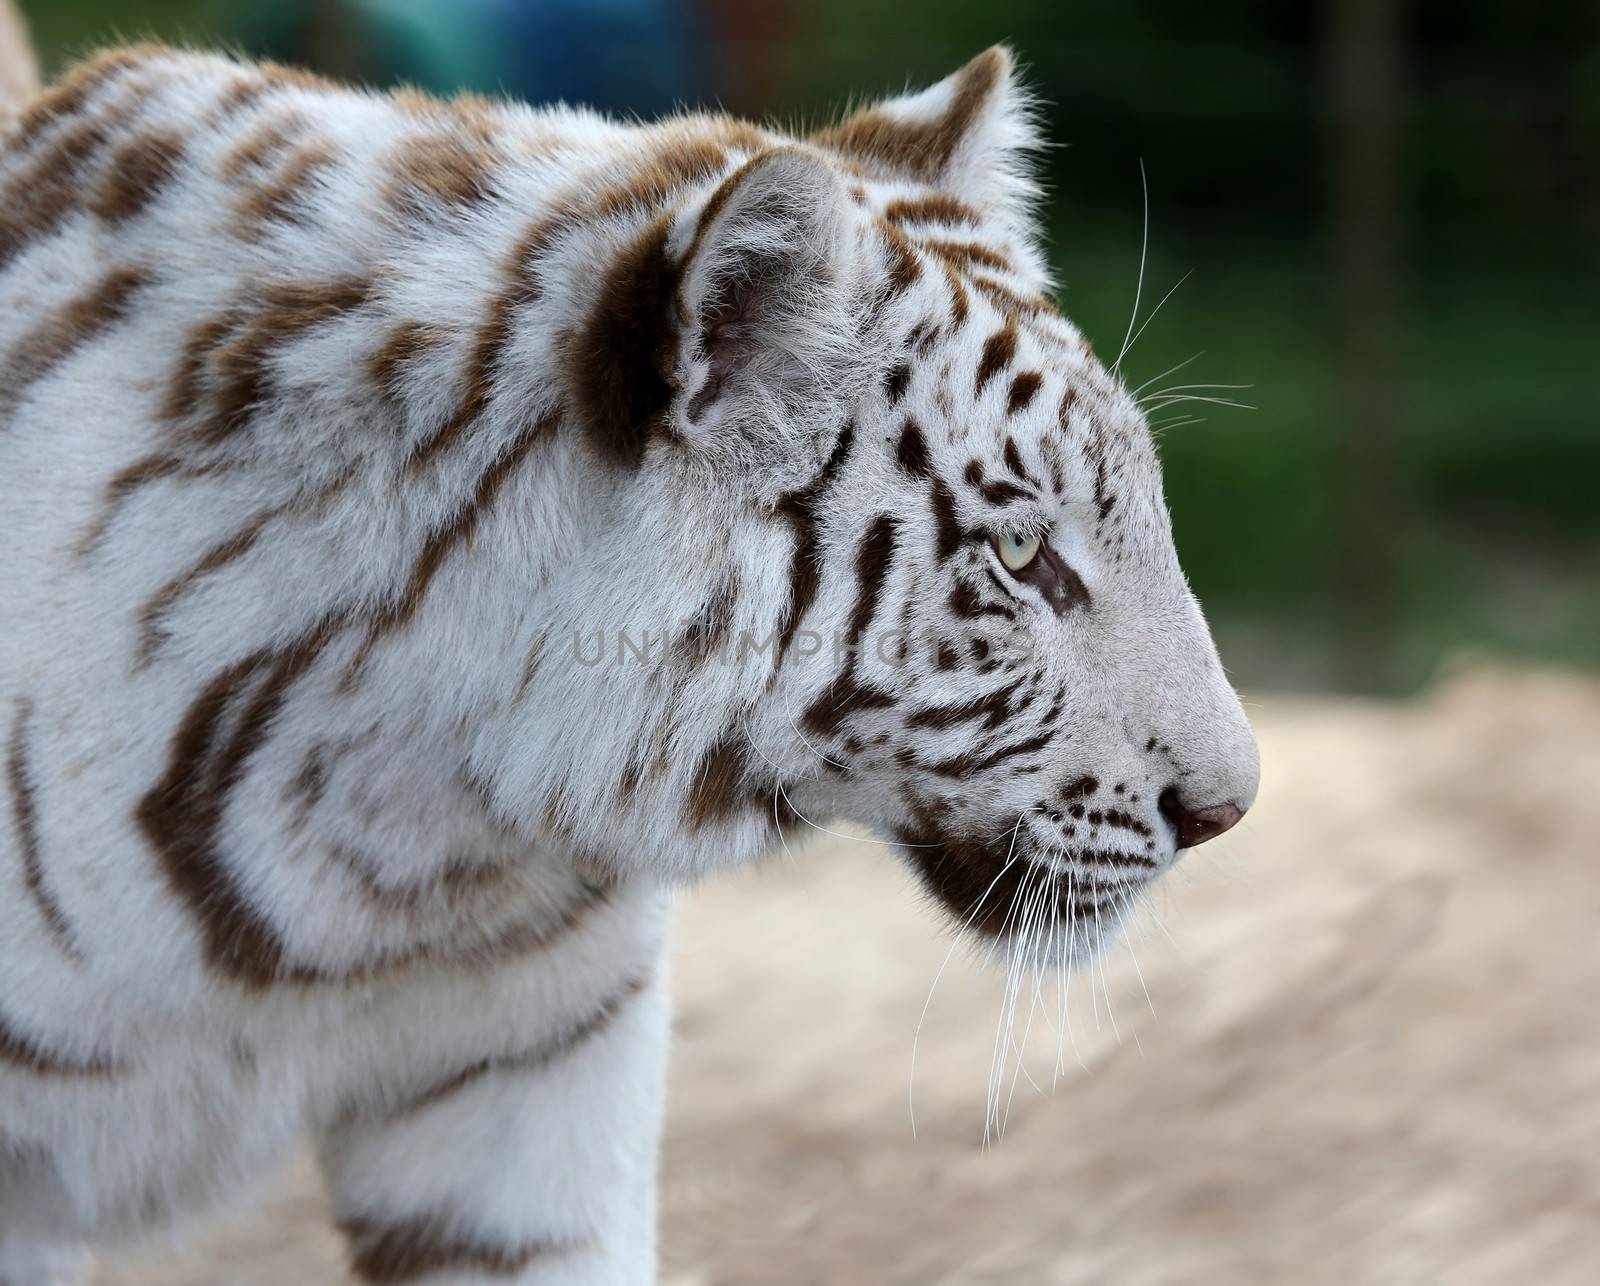 Profile of a striking white tiger with long whiskers